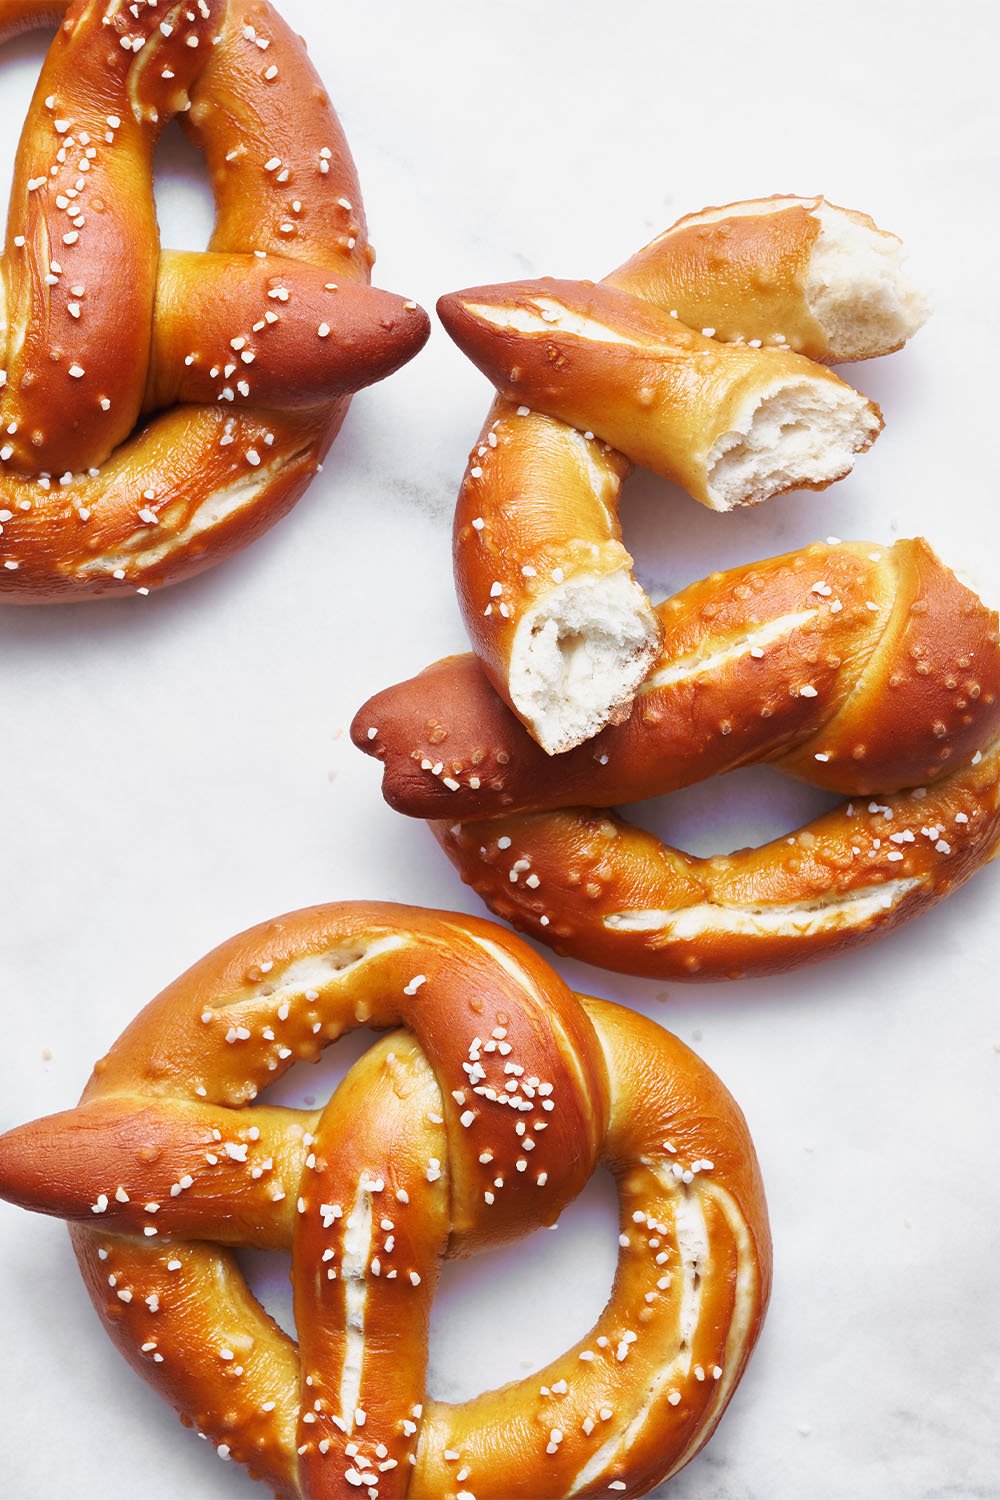 homemade Bavarian-style pretzels on a marble background